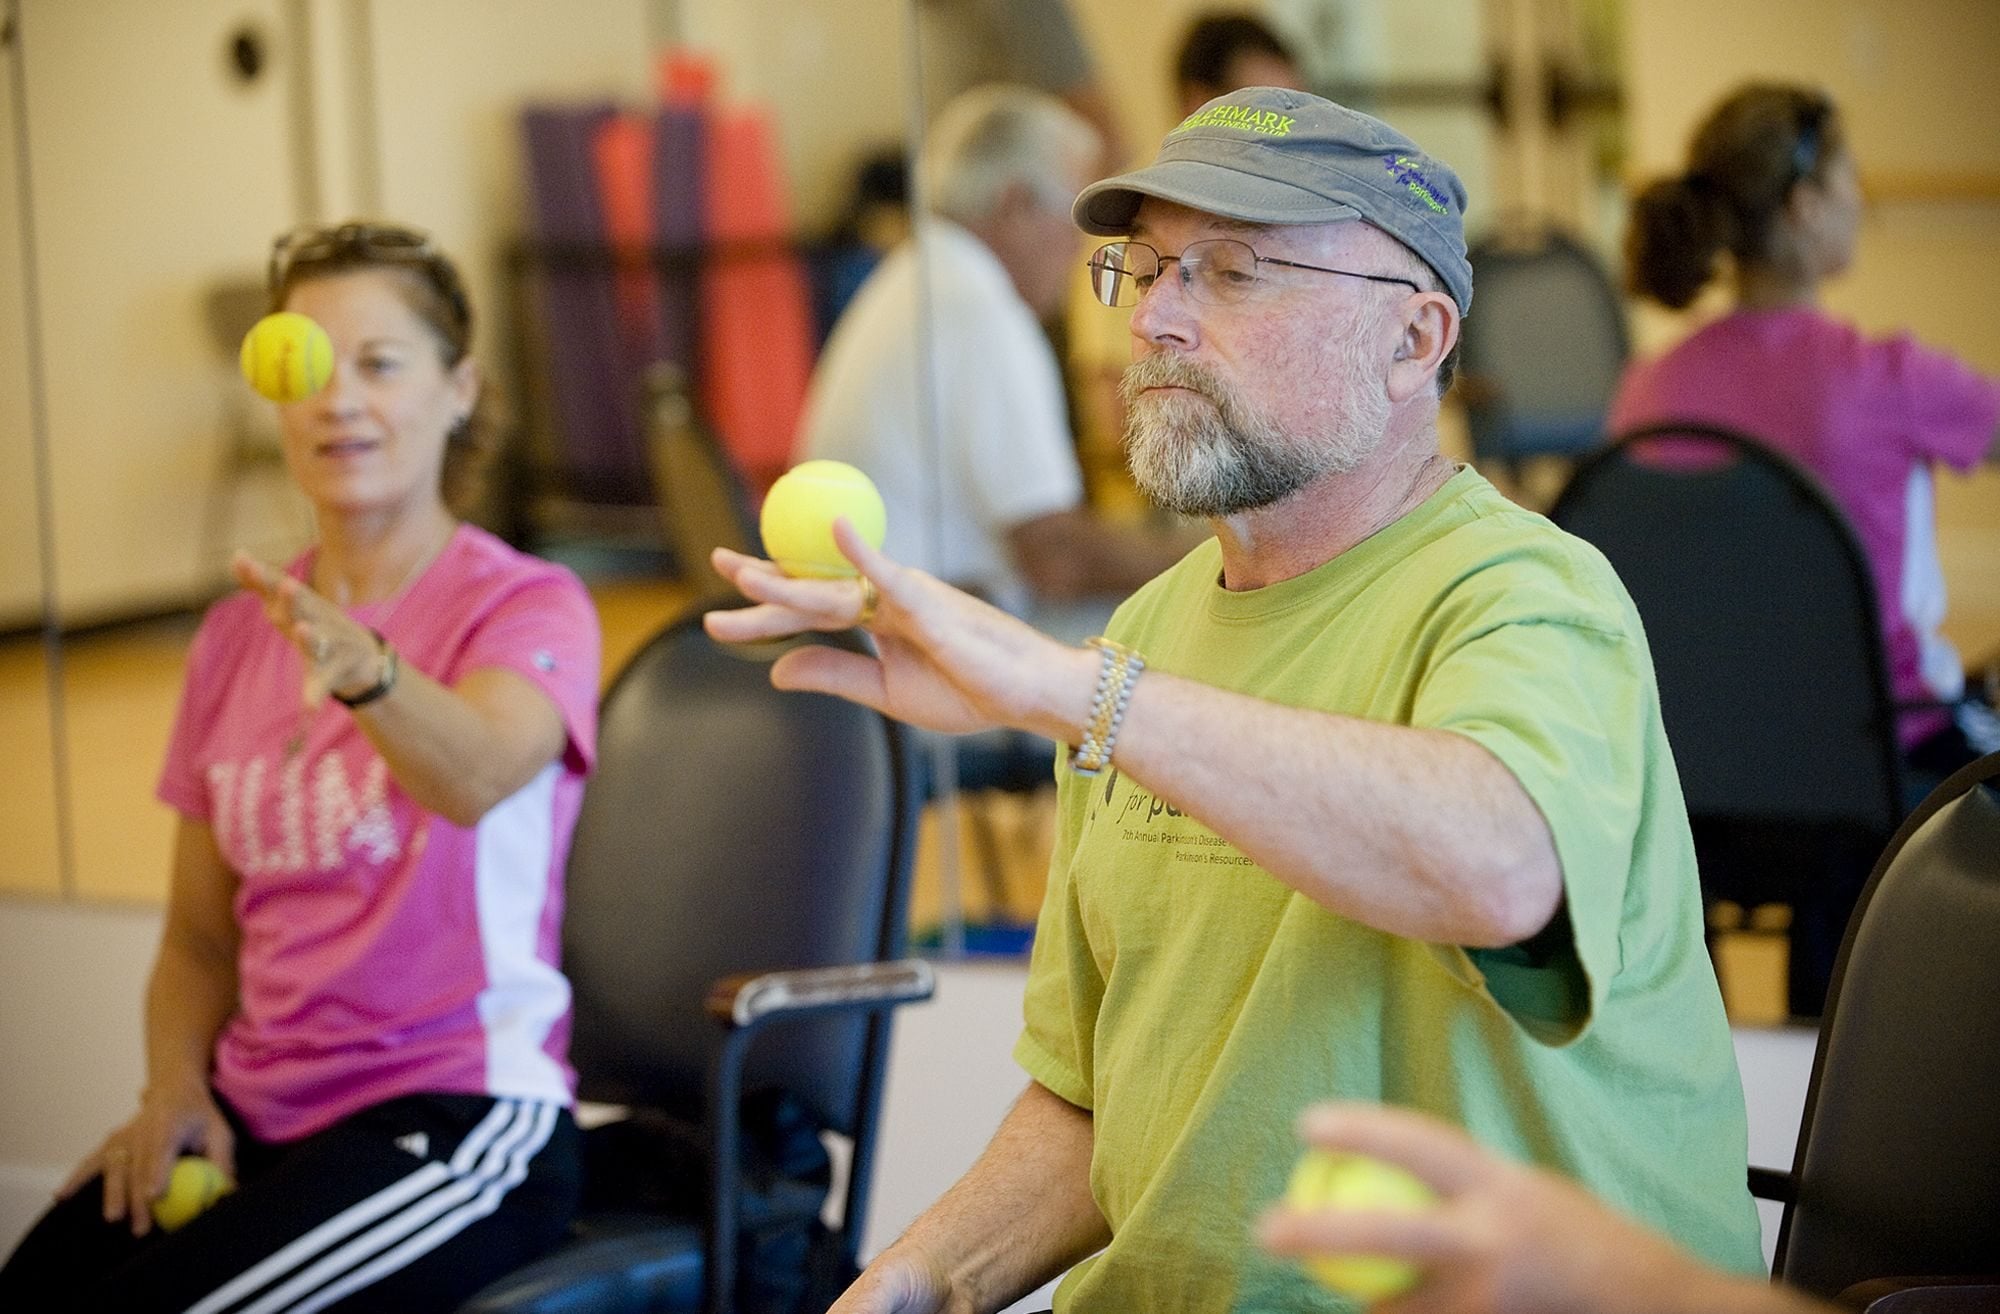 Dan Maxwell uses a tennis ball to improve hand dexterity during a class at the Waterford at Fairway Village Tuesday. Maxwell, who has Parkinson's disease, advocated for exercise classes for people with movement disorders a year and a half ago.